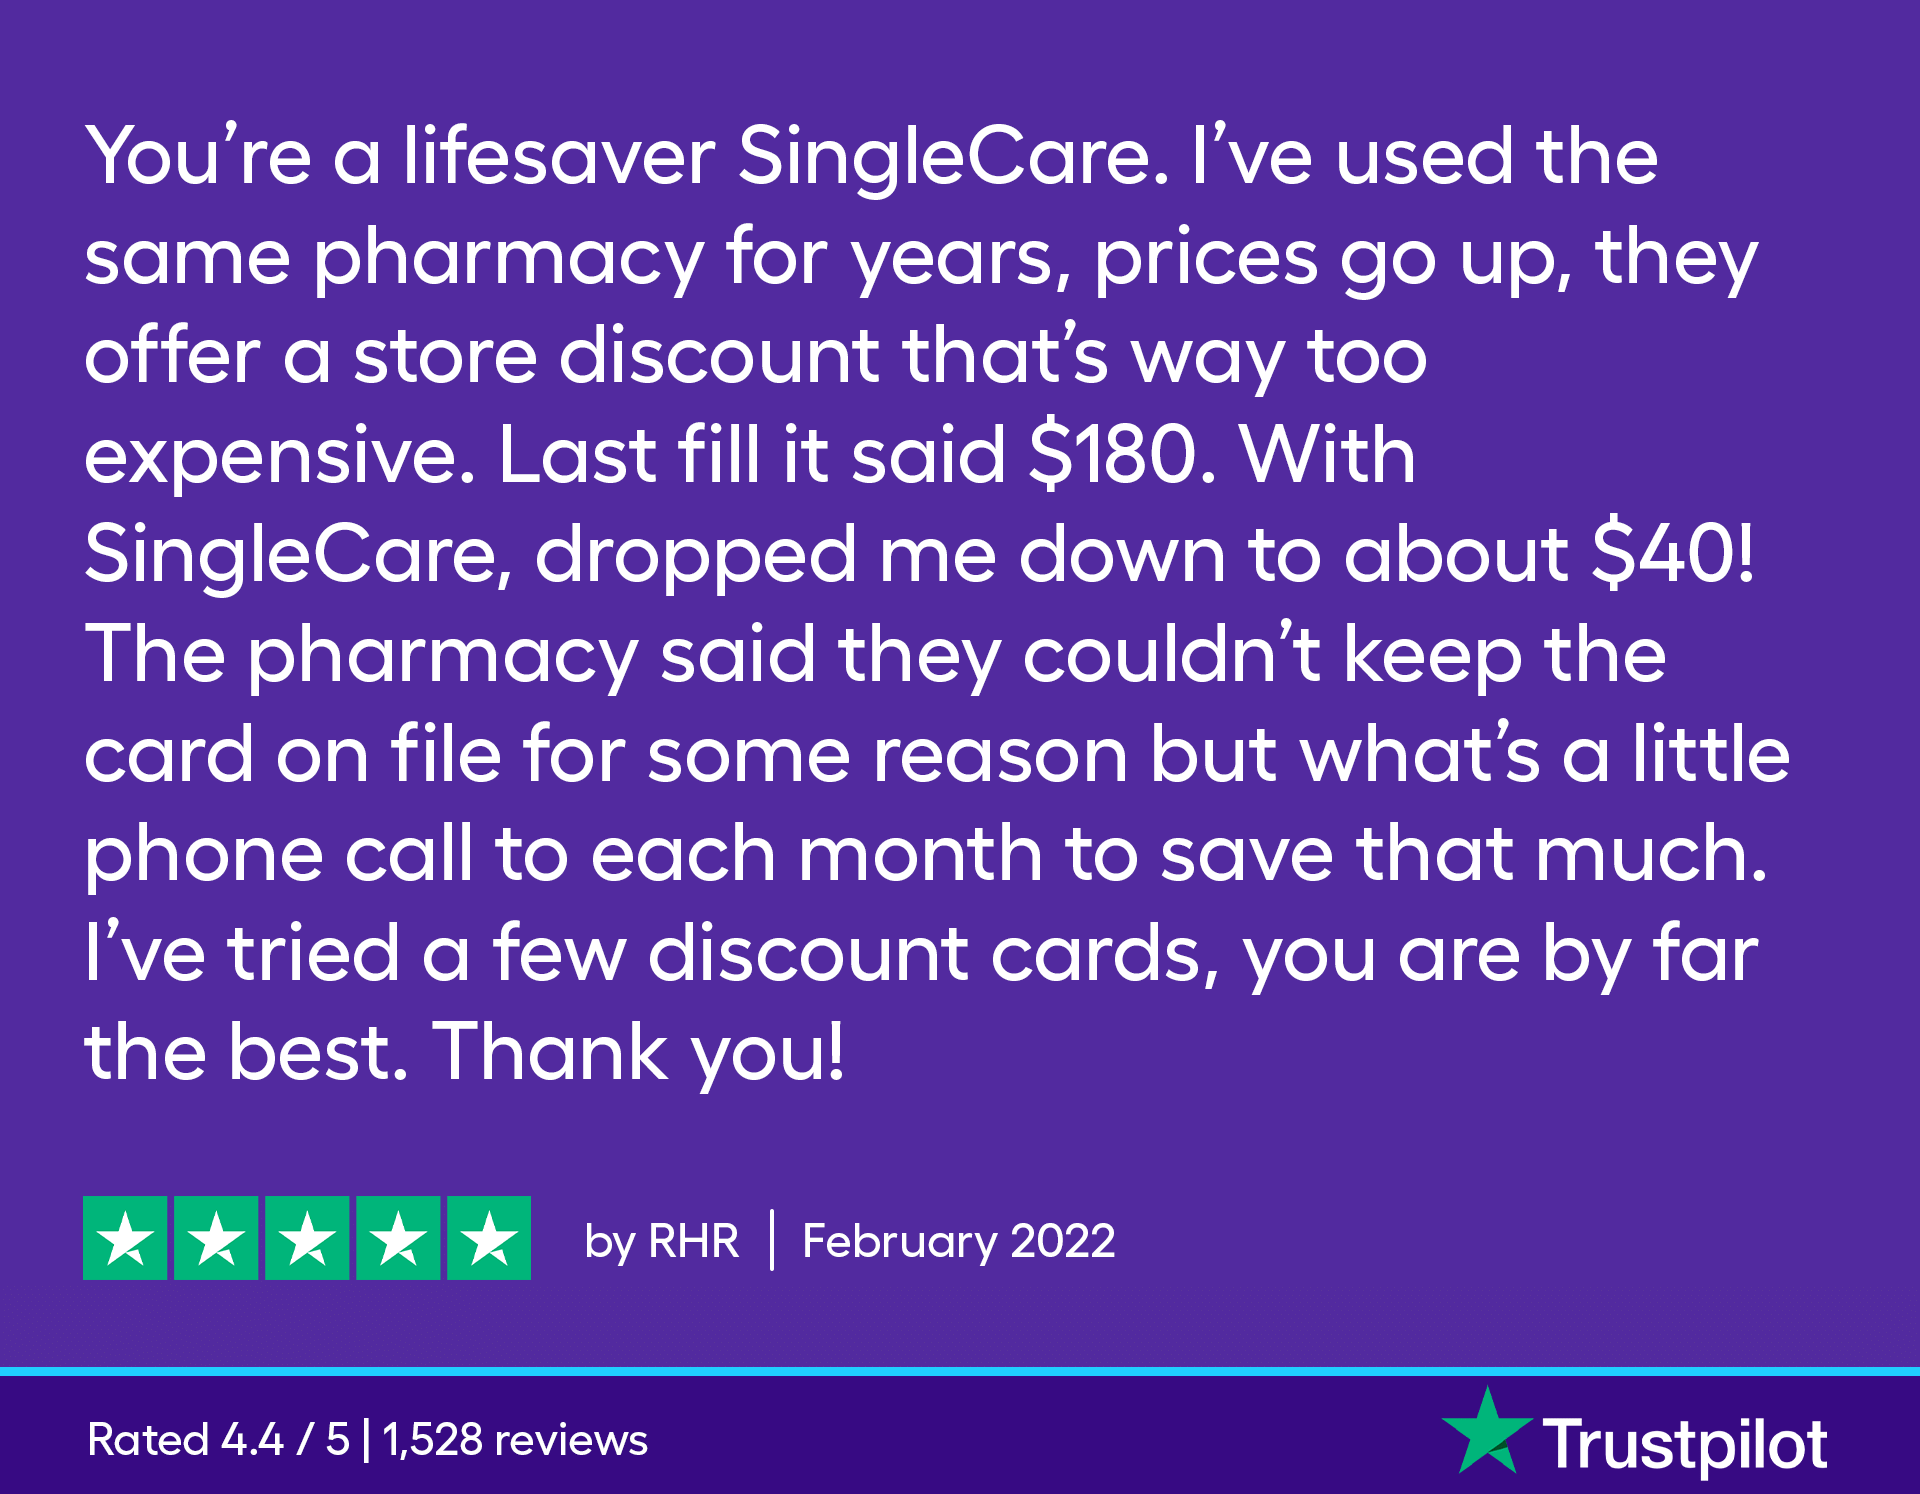 You're a lifesaver SingleCare. I've used the same pharmacy for years, prices go up, they offer a store discount that's way too expensive. Last fill it said $180. With SingleCare, dropped me down to about $40! The pharmacy said they couldn't keep the card on file for some reason but what's a little phone call to each month to save that much. I've tried a few discount cards, you are by far the best. Thank you!